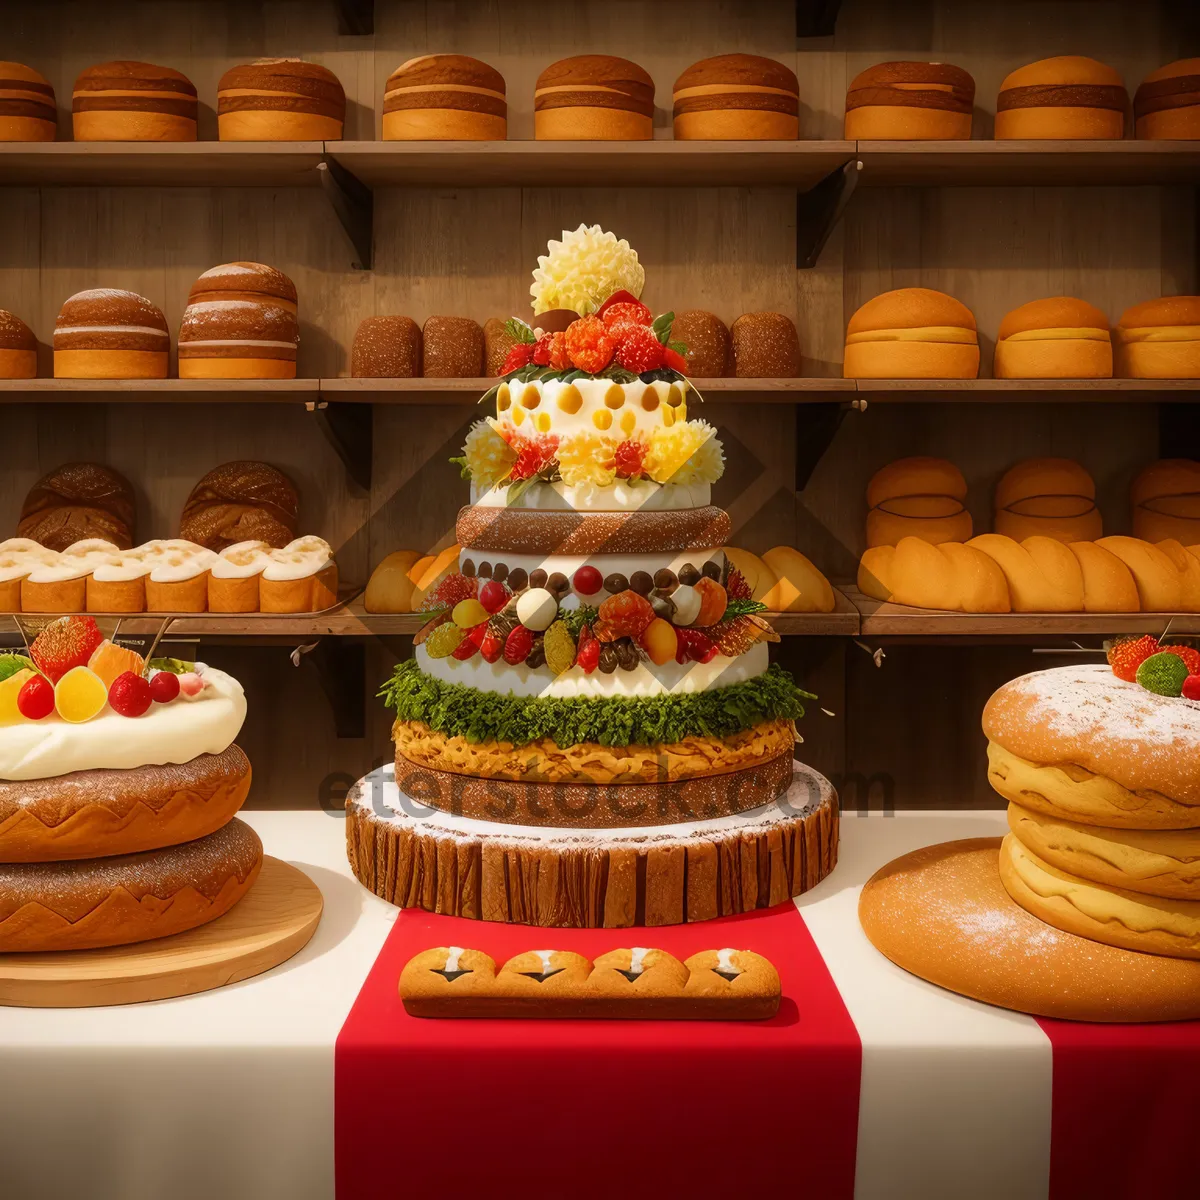 Picture of Bakery Delights: Gourmet Celebration Spread on Table